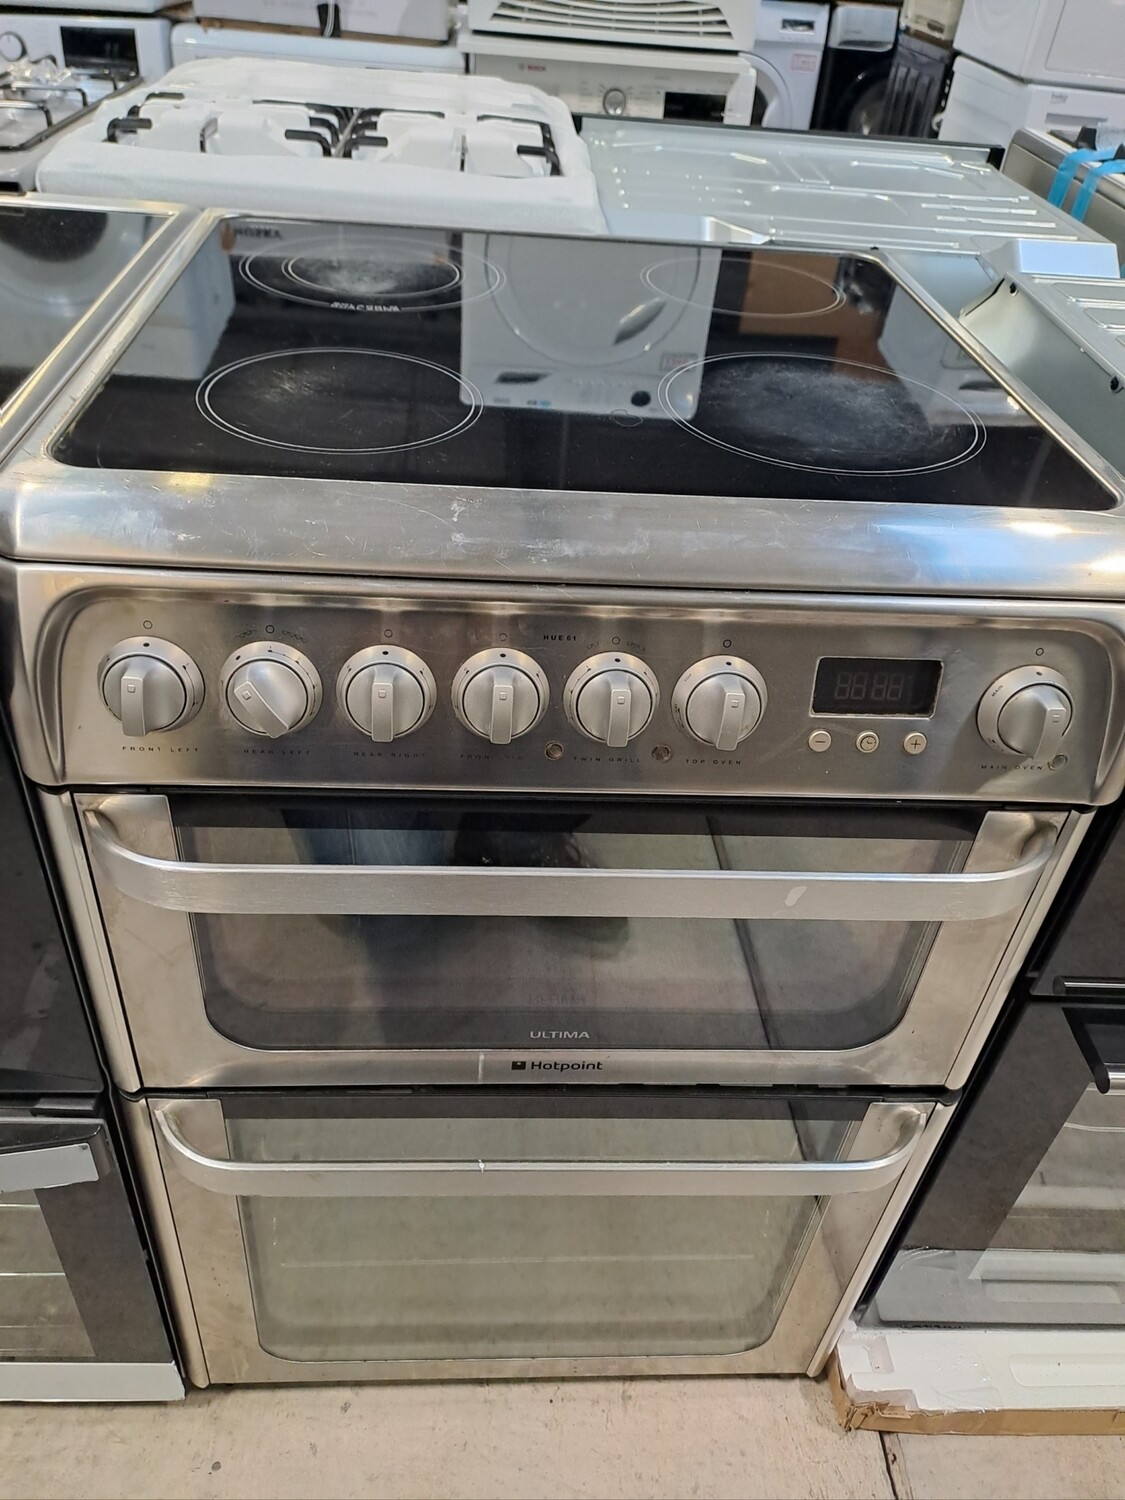 Hotpoint HUE61XS 60cm Electric cooker Twin Cavity Double Oven Ceramic Hob - Stainless Steel - Refurbished + 6 month guarantee 